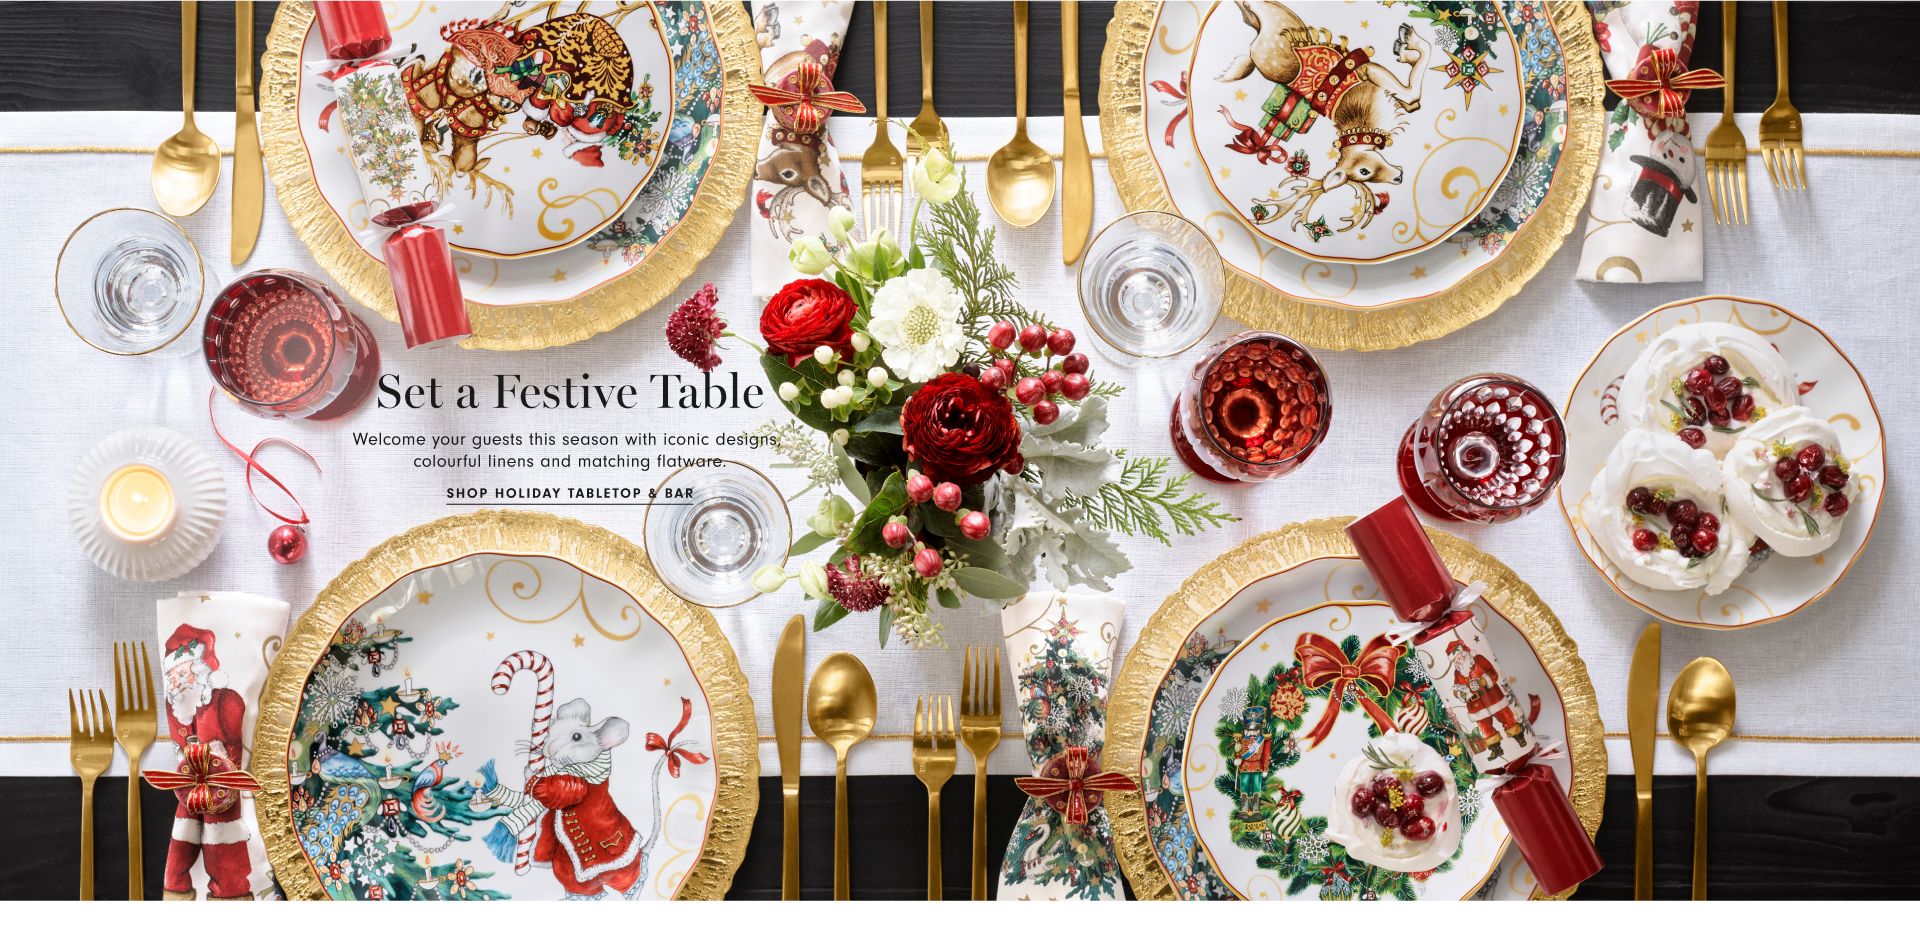 Shop Holiday Tabletop